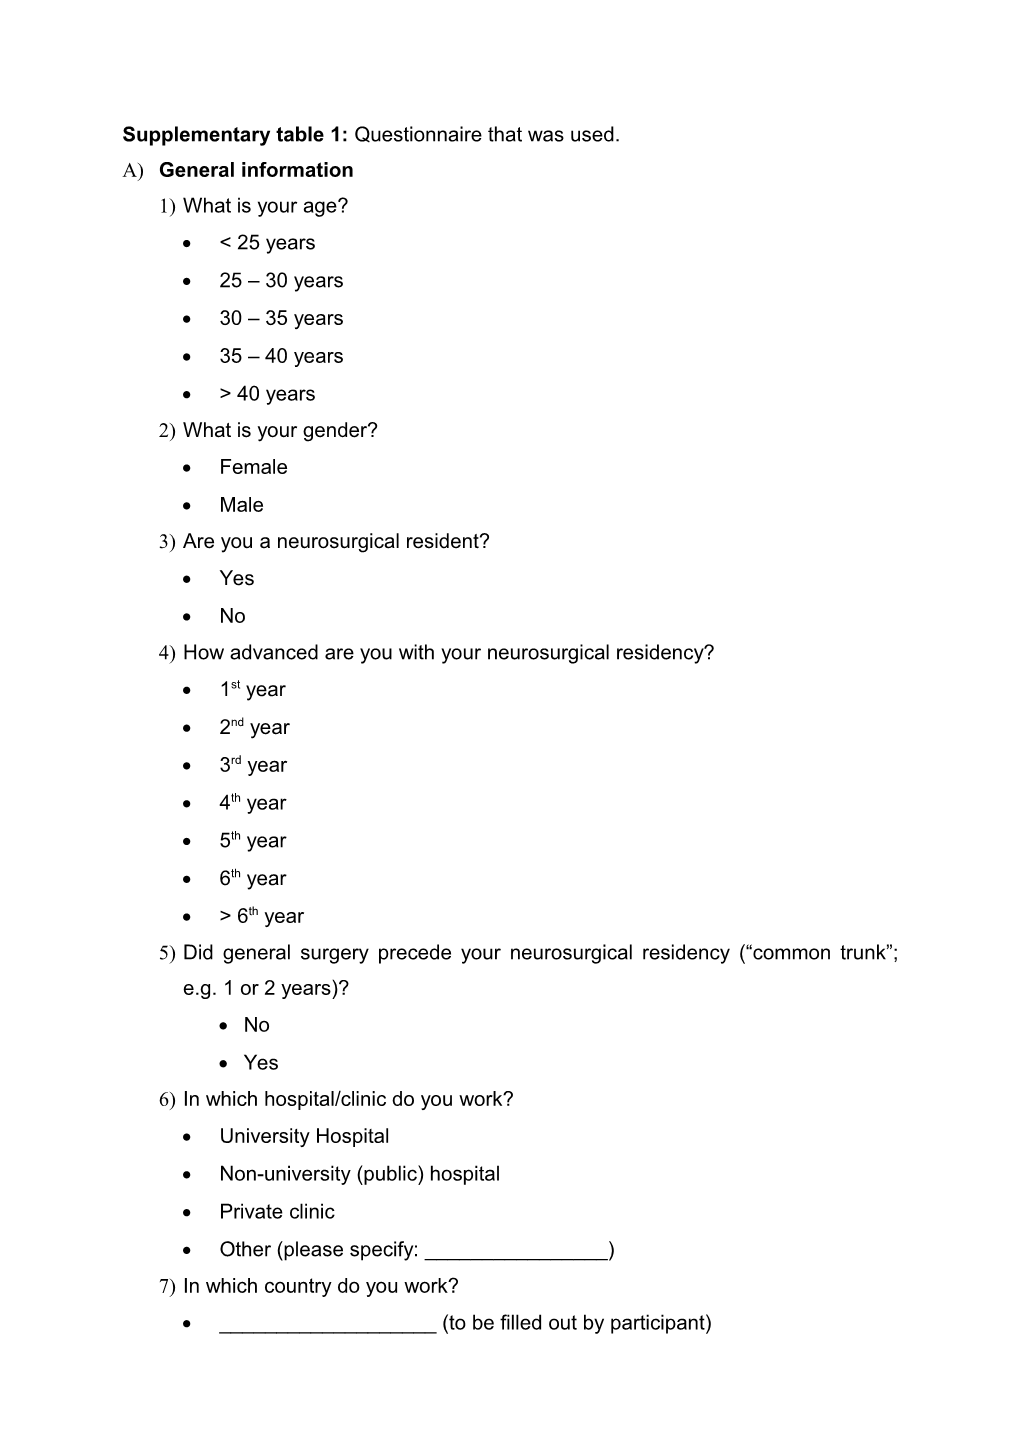 Supplementary Table 1: Questionnaire That Was Used